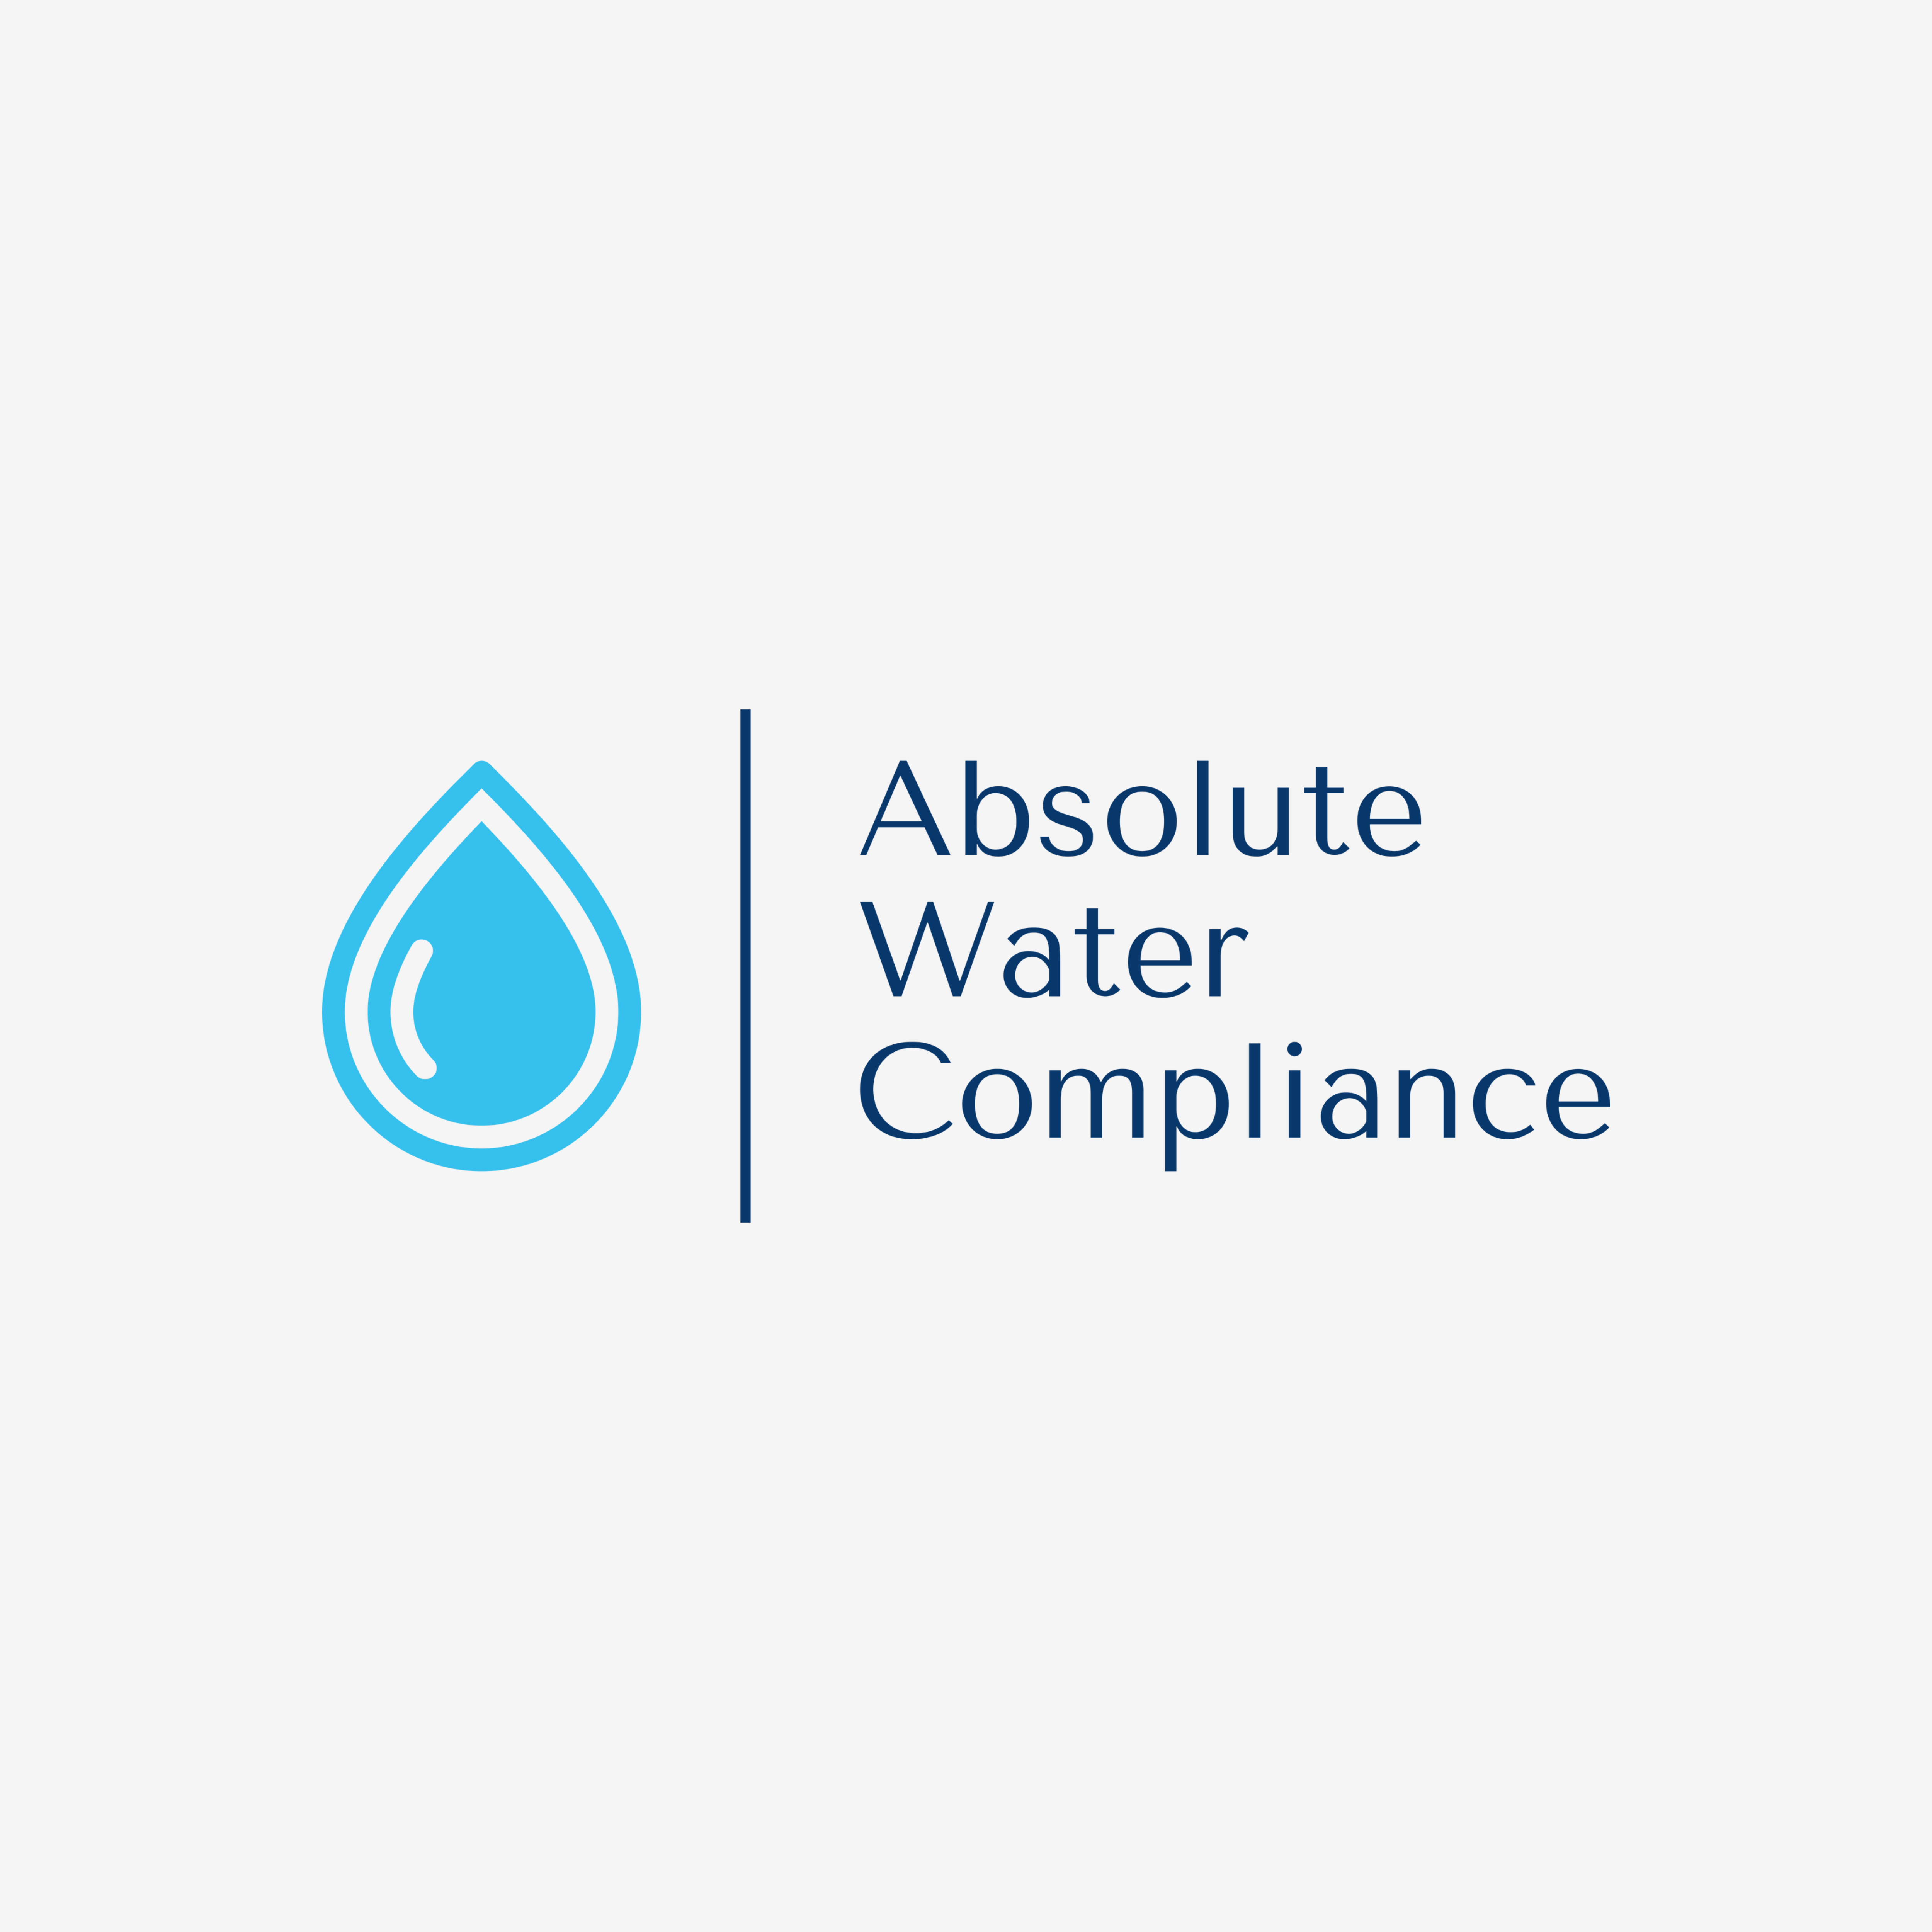 Absolute Water Compliance